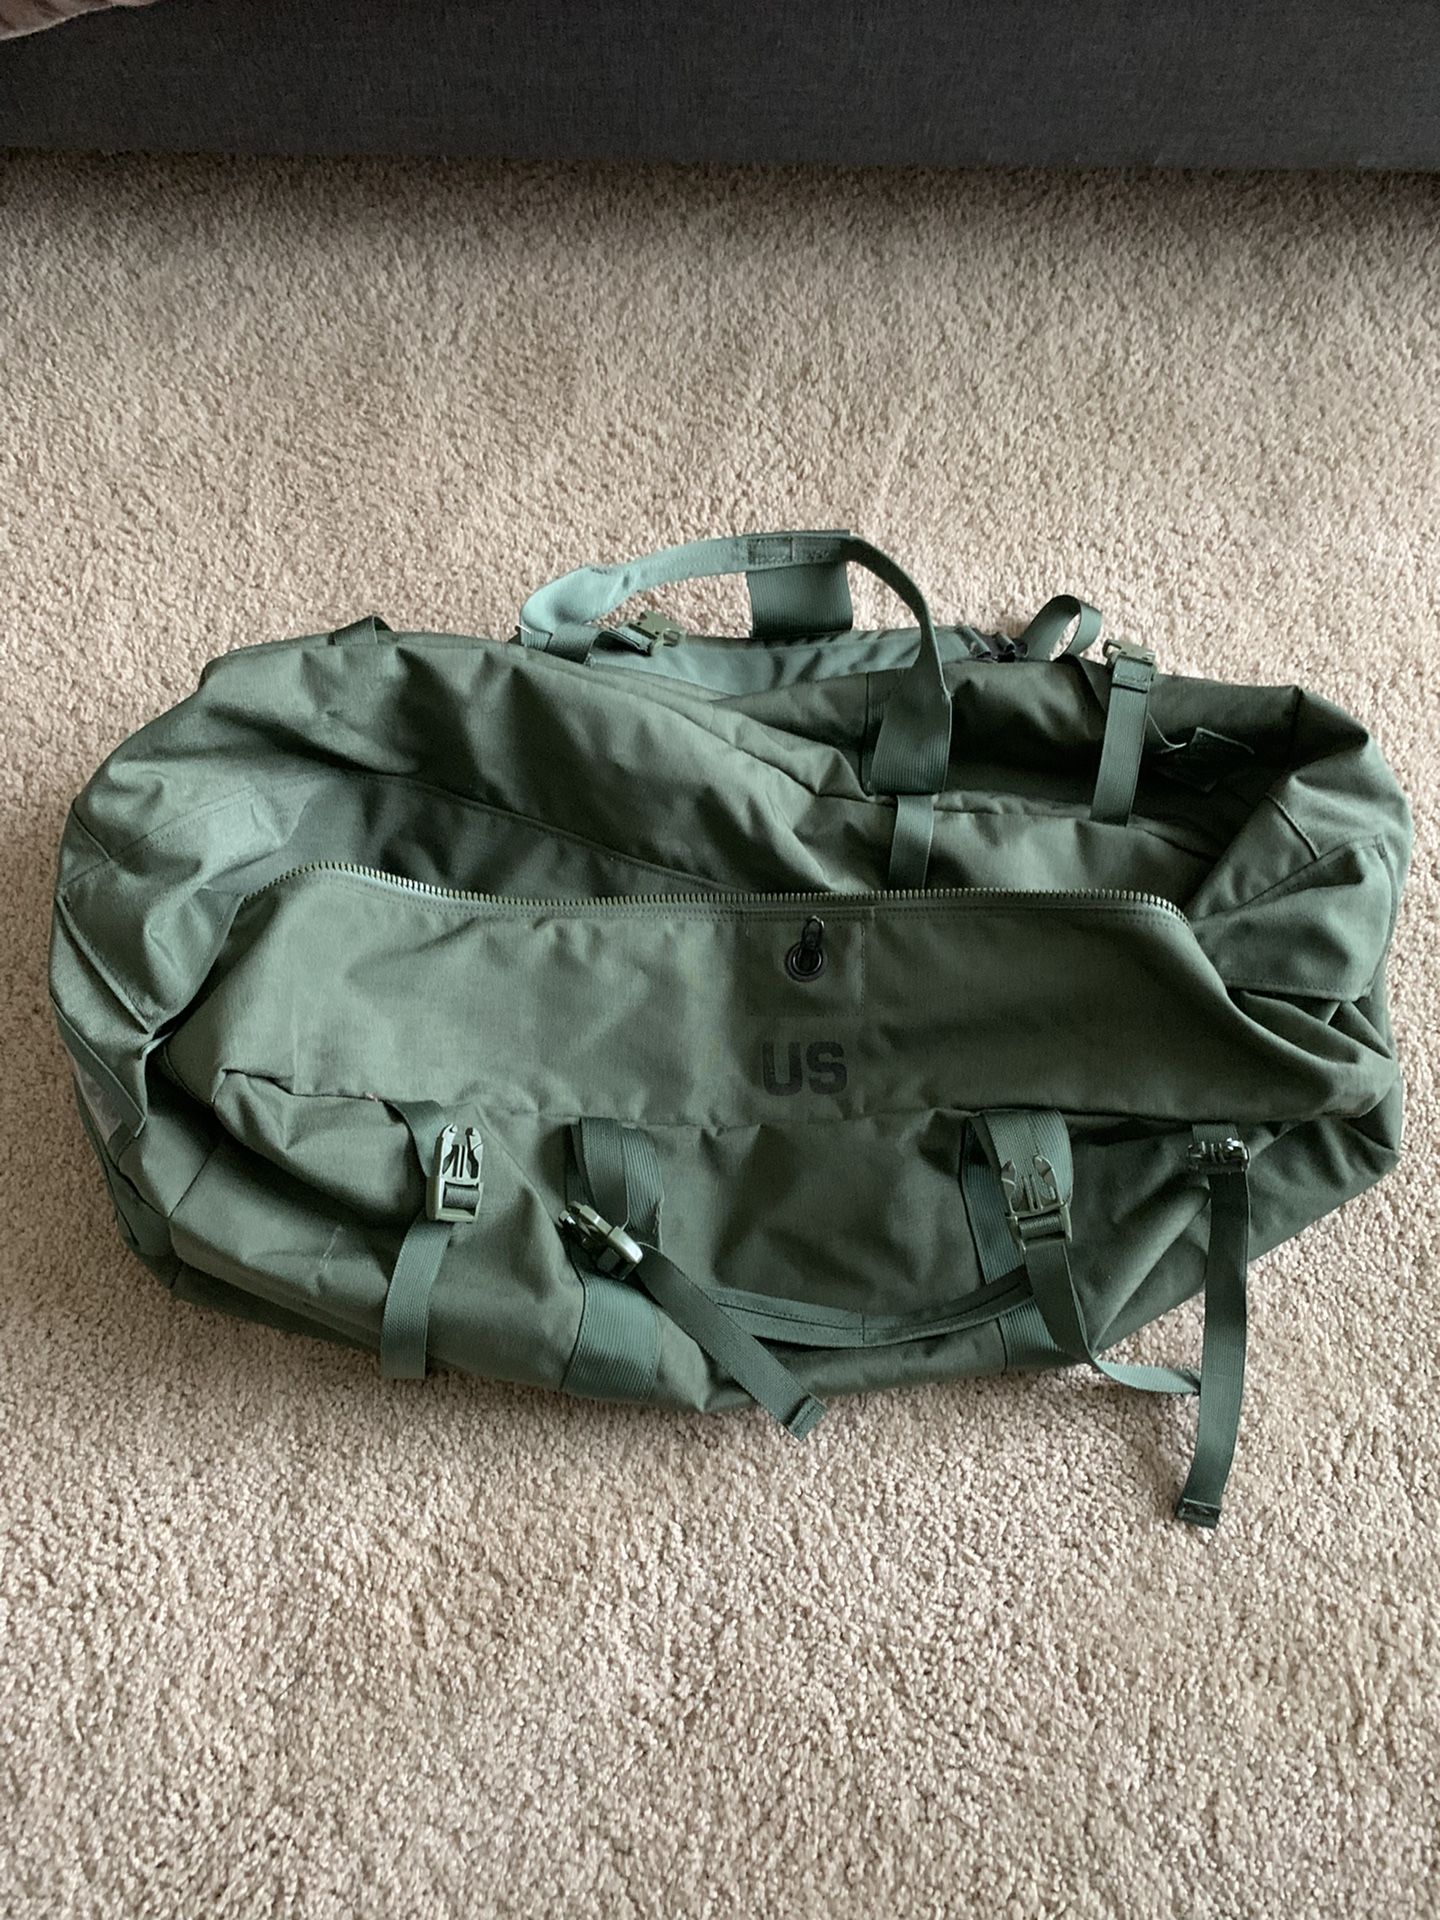 Military Duffle Bag With Backpack Straps